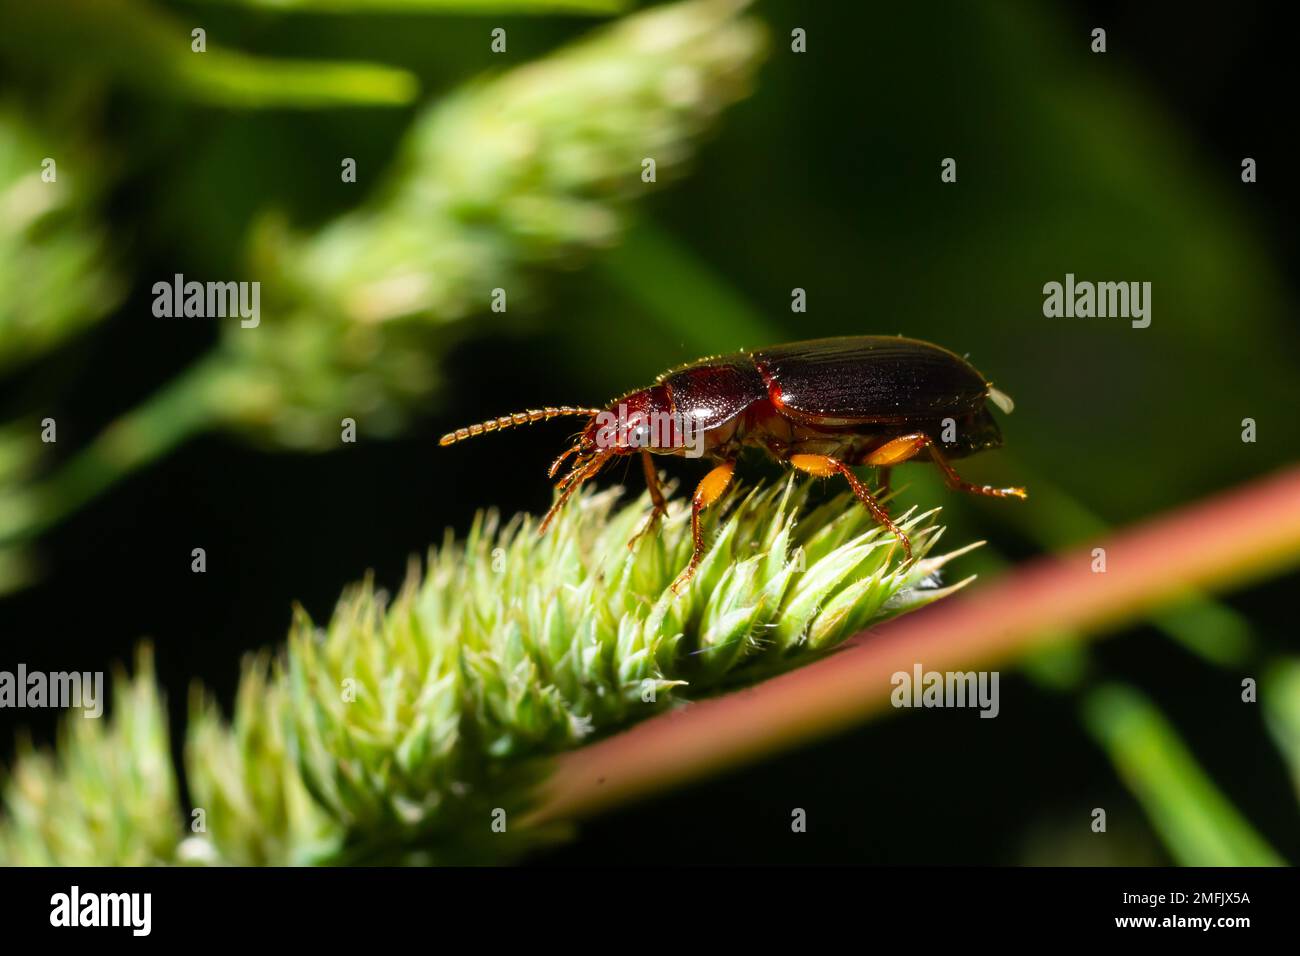 copper colored ground beetle on grass in a natural environment. summer, dream day. Stock Photo